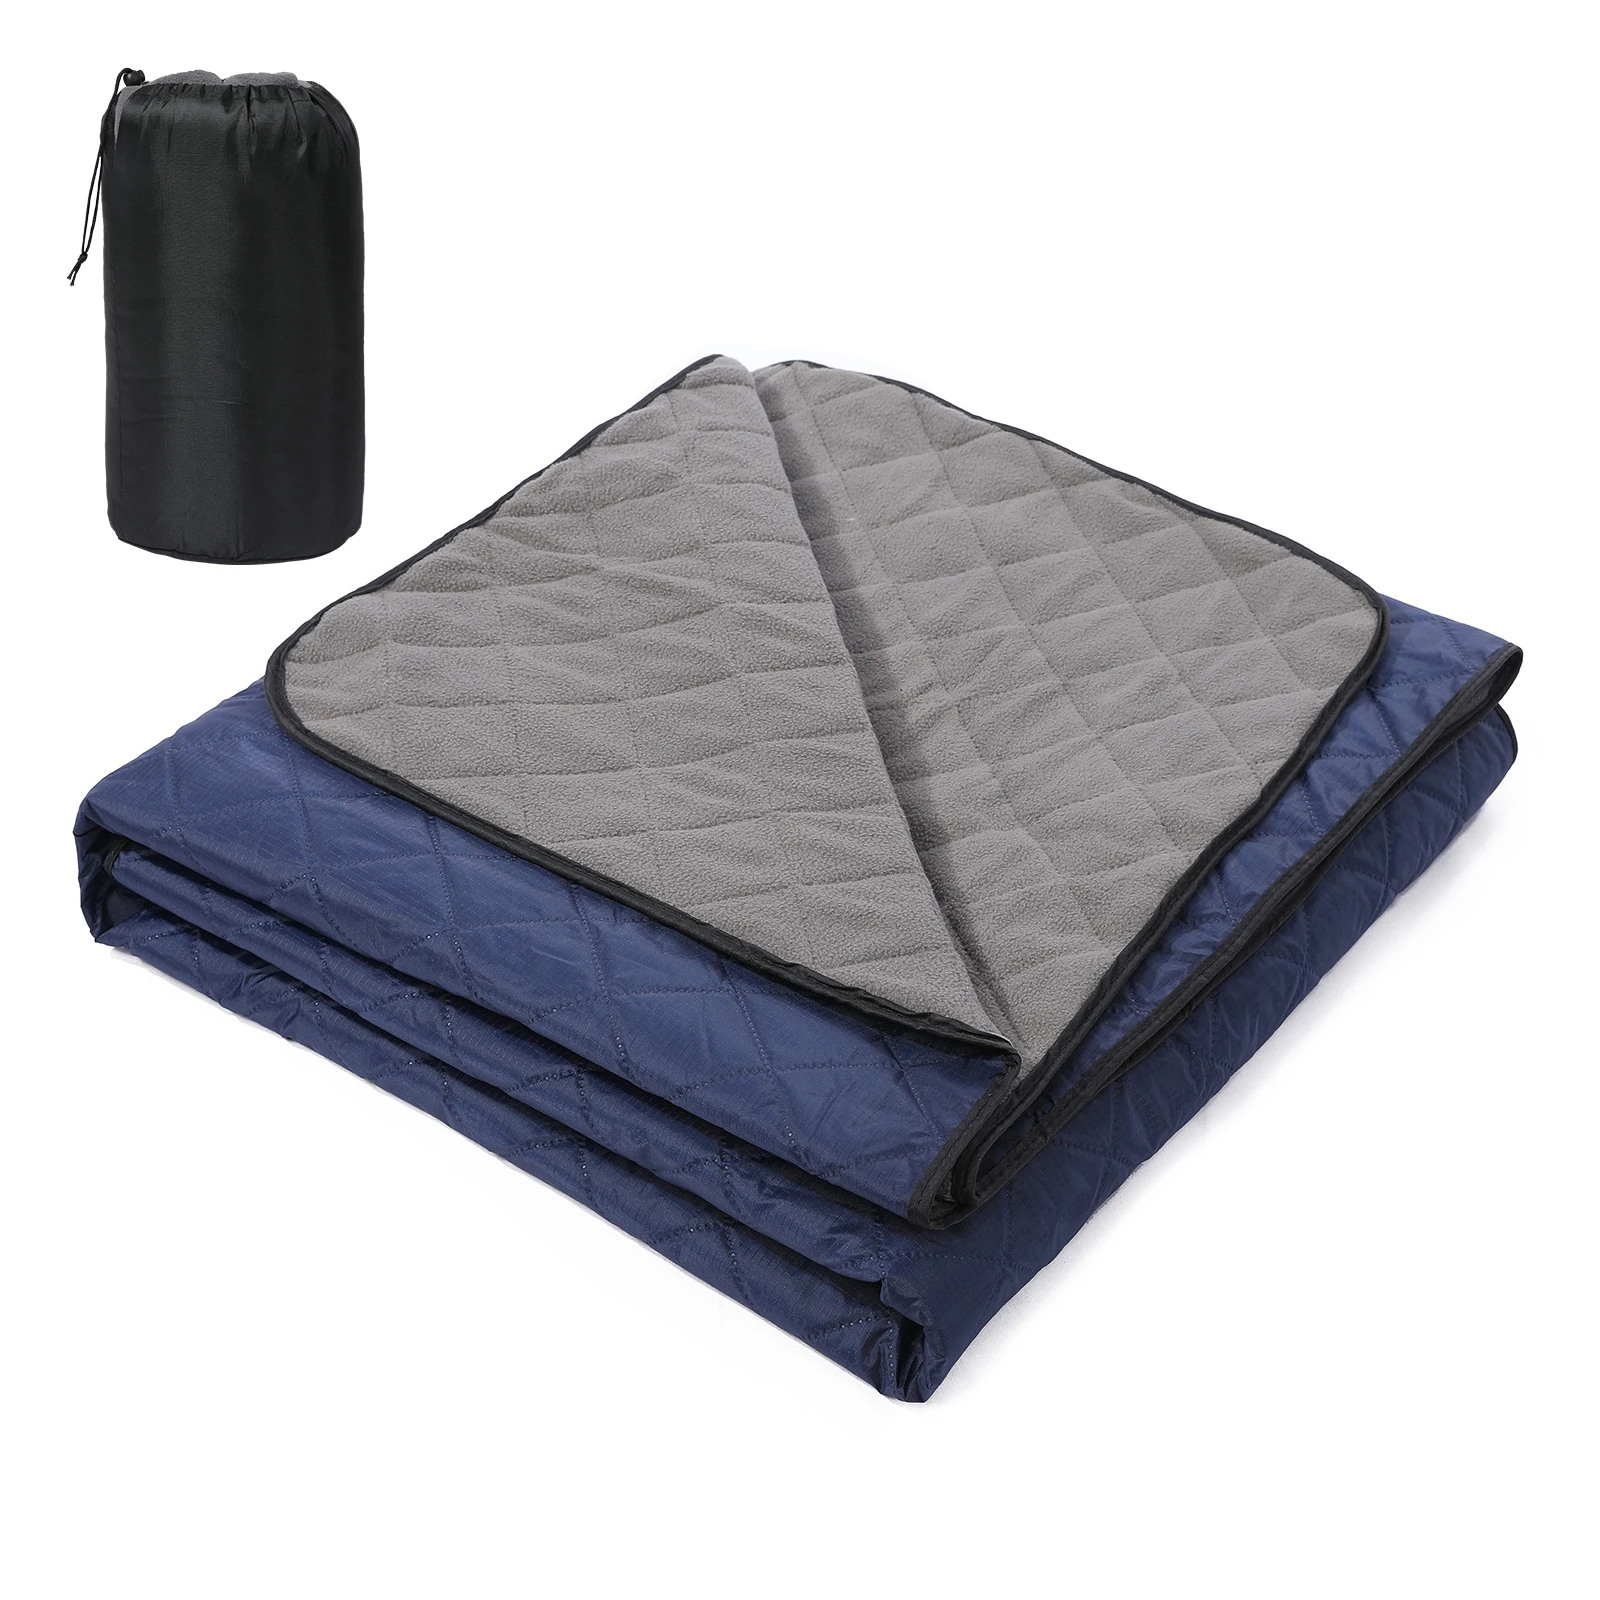 

Camping Blanket Waterproof Quilted Fleece Stadium Blanket with High-quality Polyester Fabric for Outdoor Camping Picnic Park